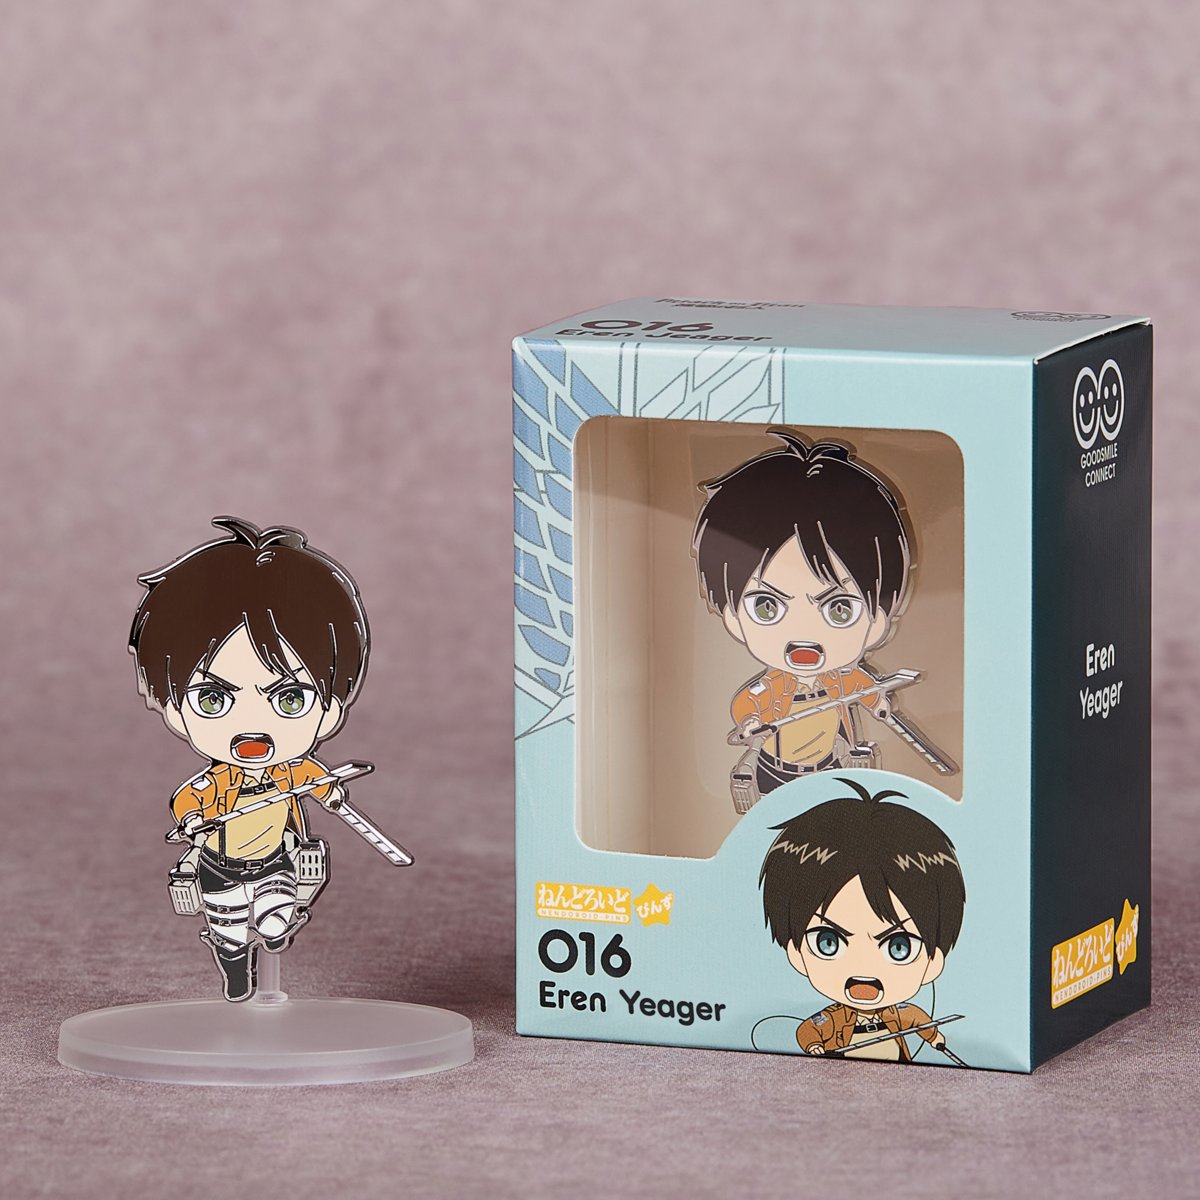 Eren Yeager Attack on Titan Nendoroid Pin image count 1